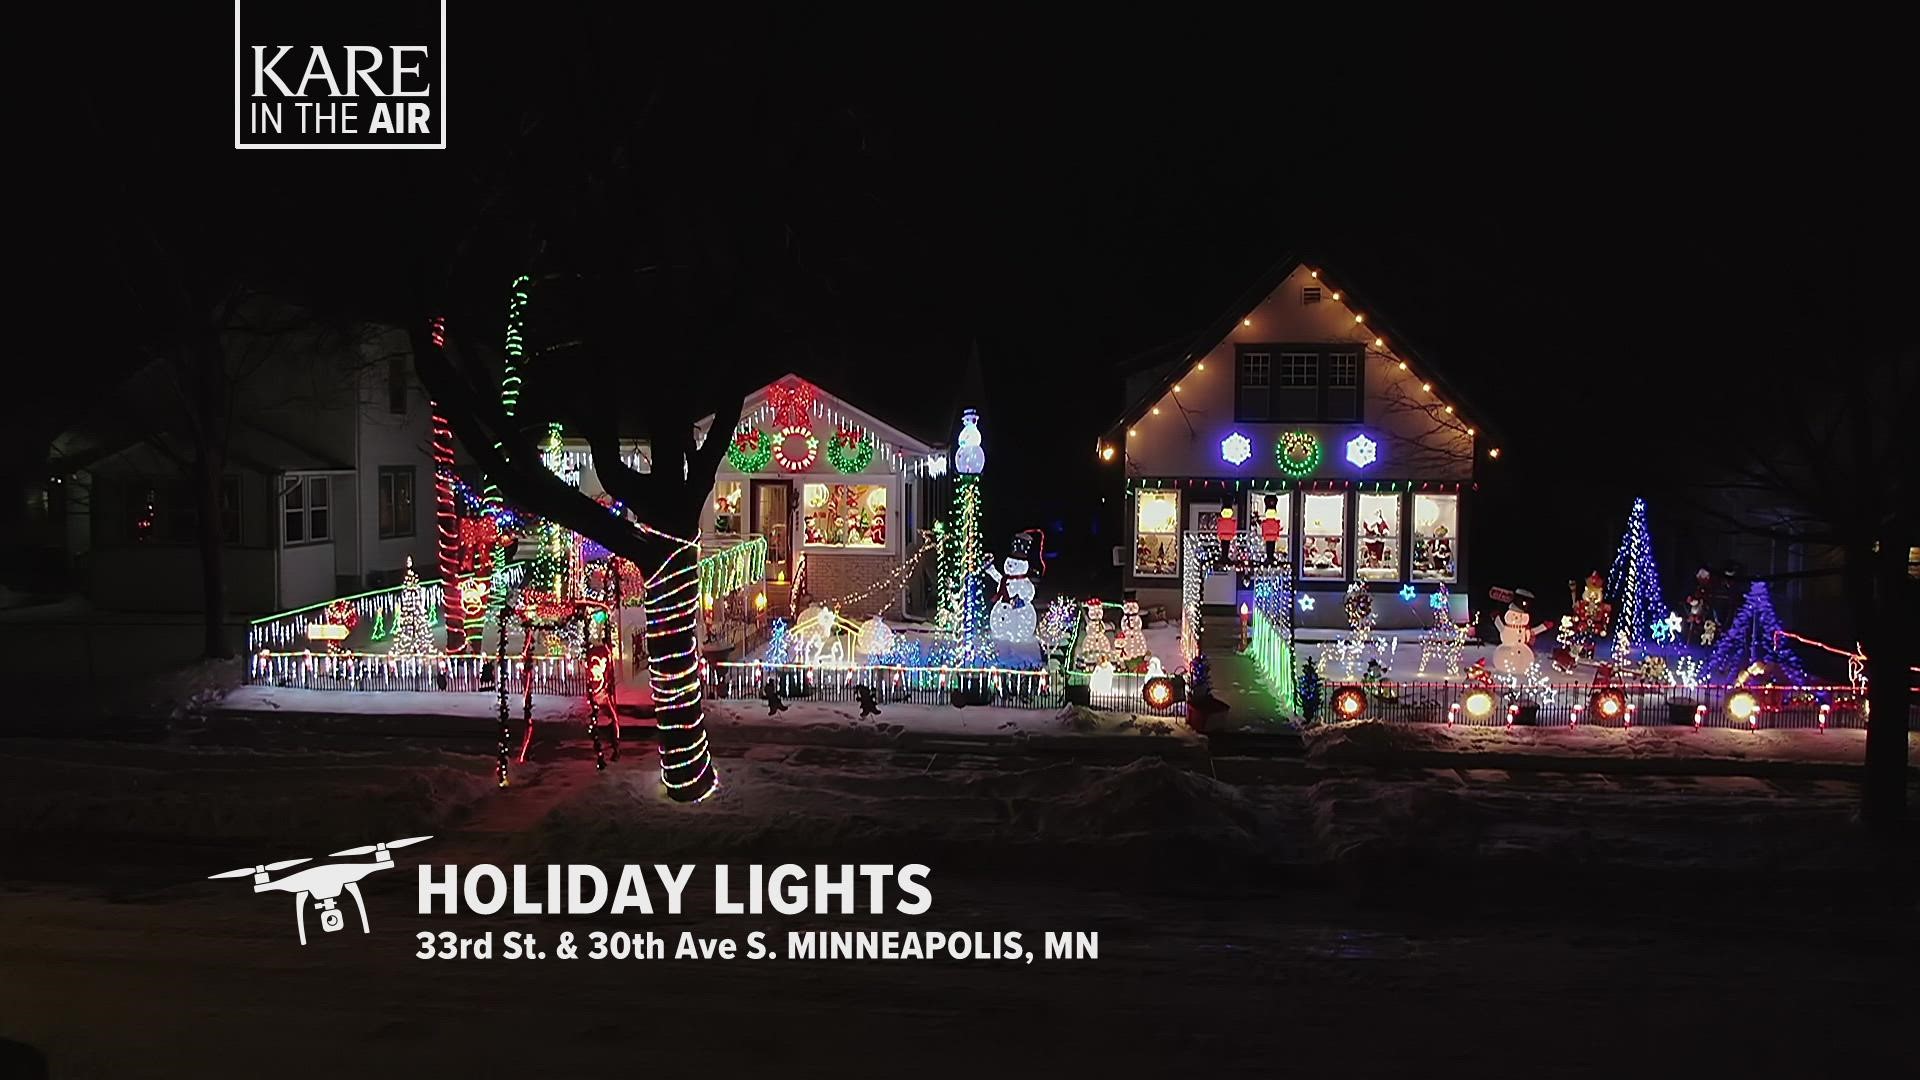 We kick off KARE in the Air: Holiday lights edition with this group of houses off Minnehaha Avenue in south Minneapolis.